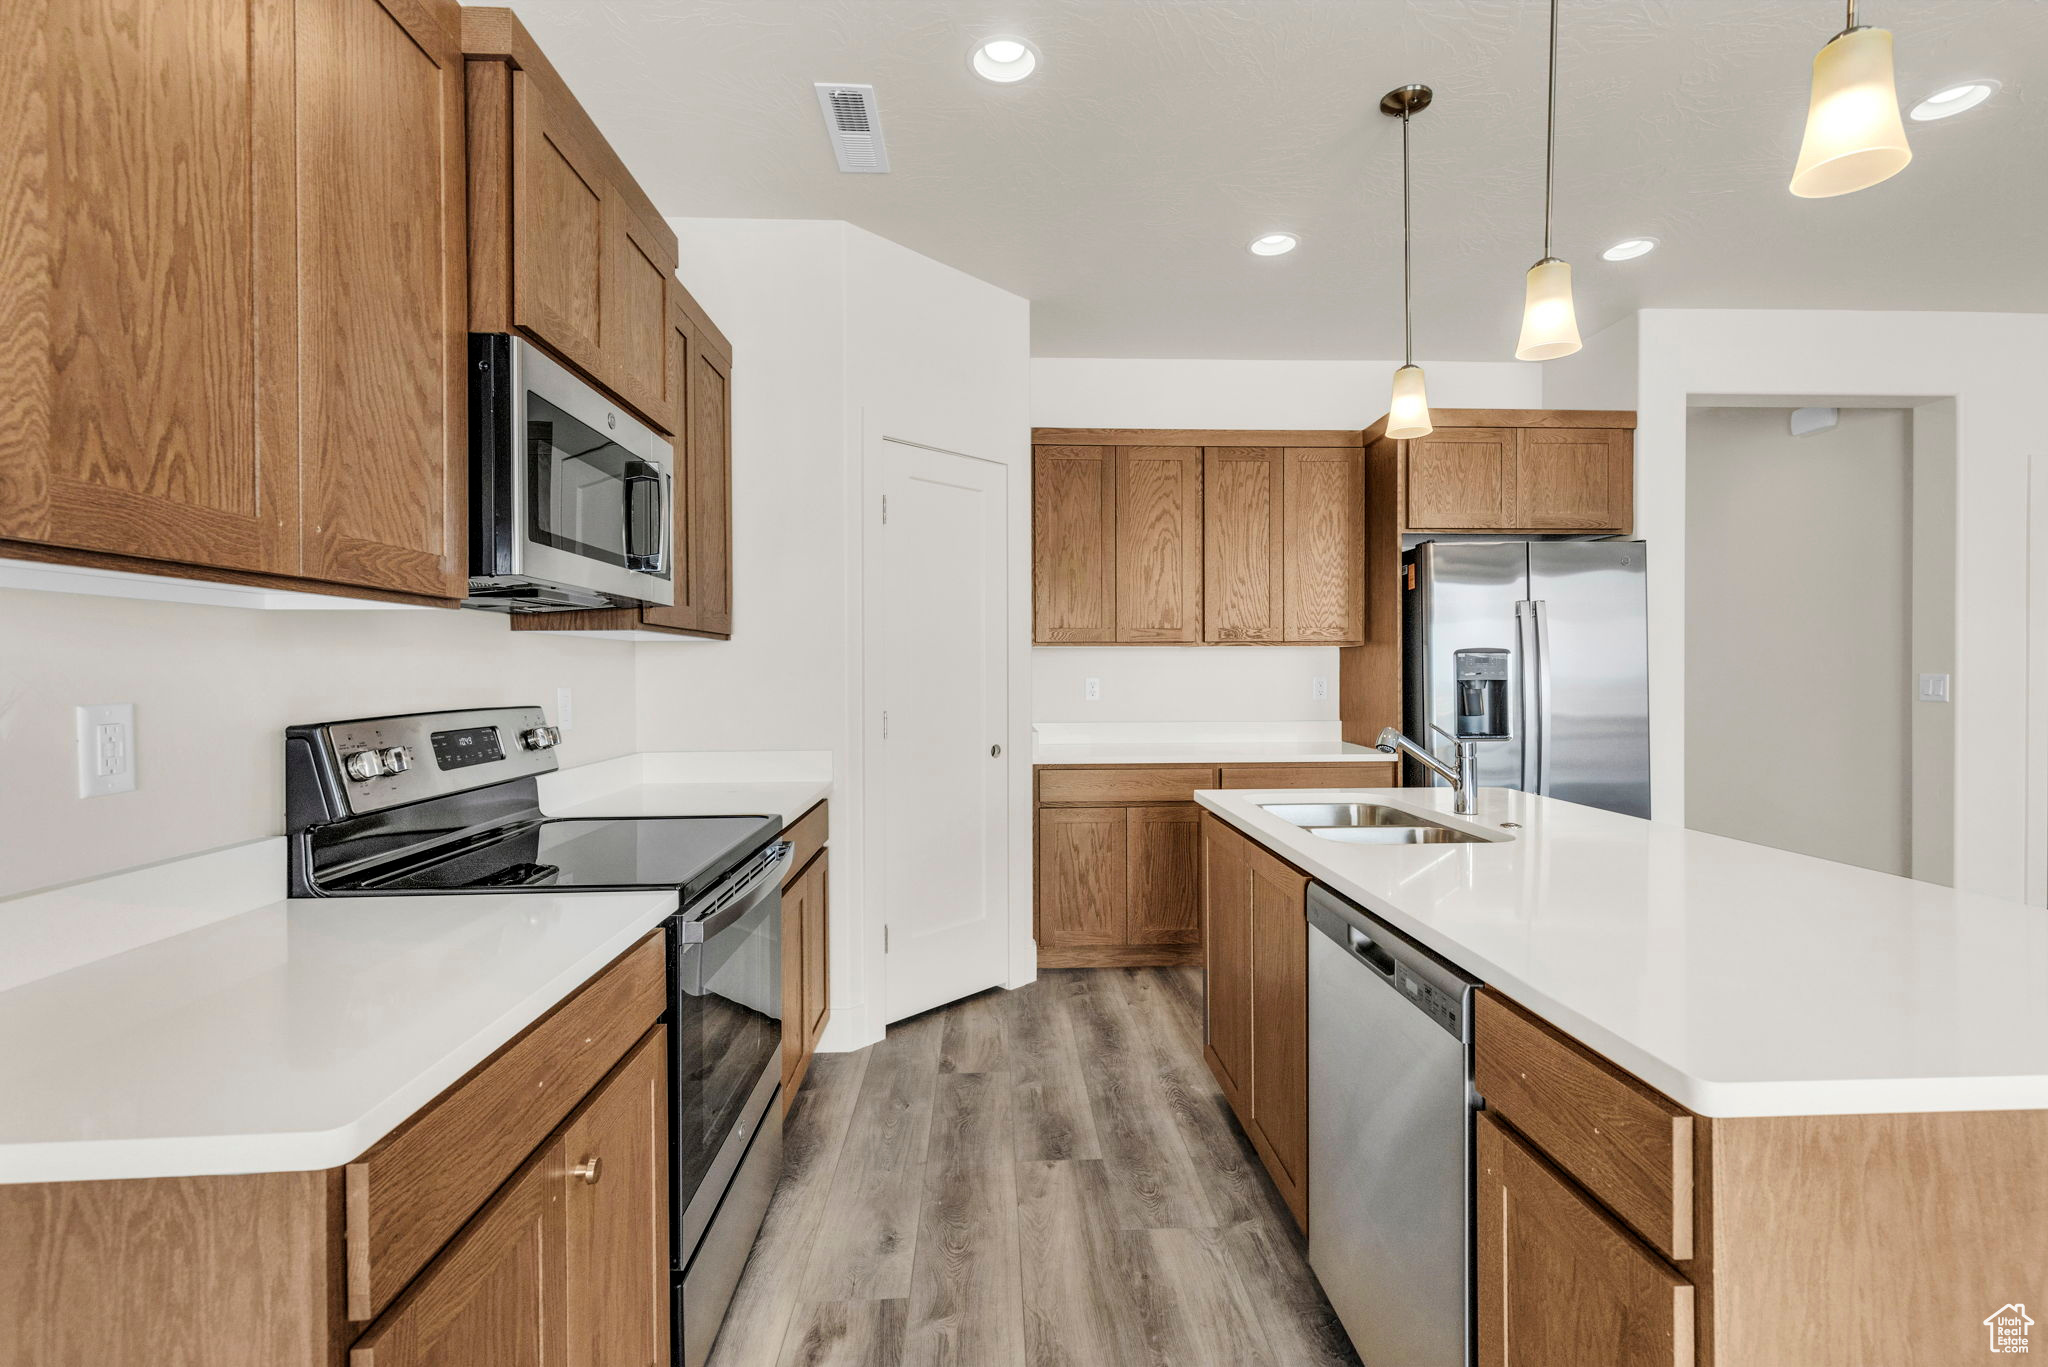 Kitchen with light hardwood / wood-style flooring, a center island with sink, sink, decorative light fixtures, and appliances with stainless steel finishes